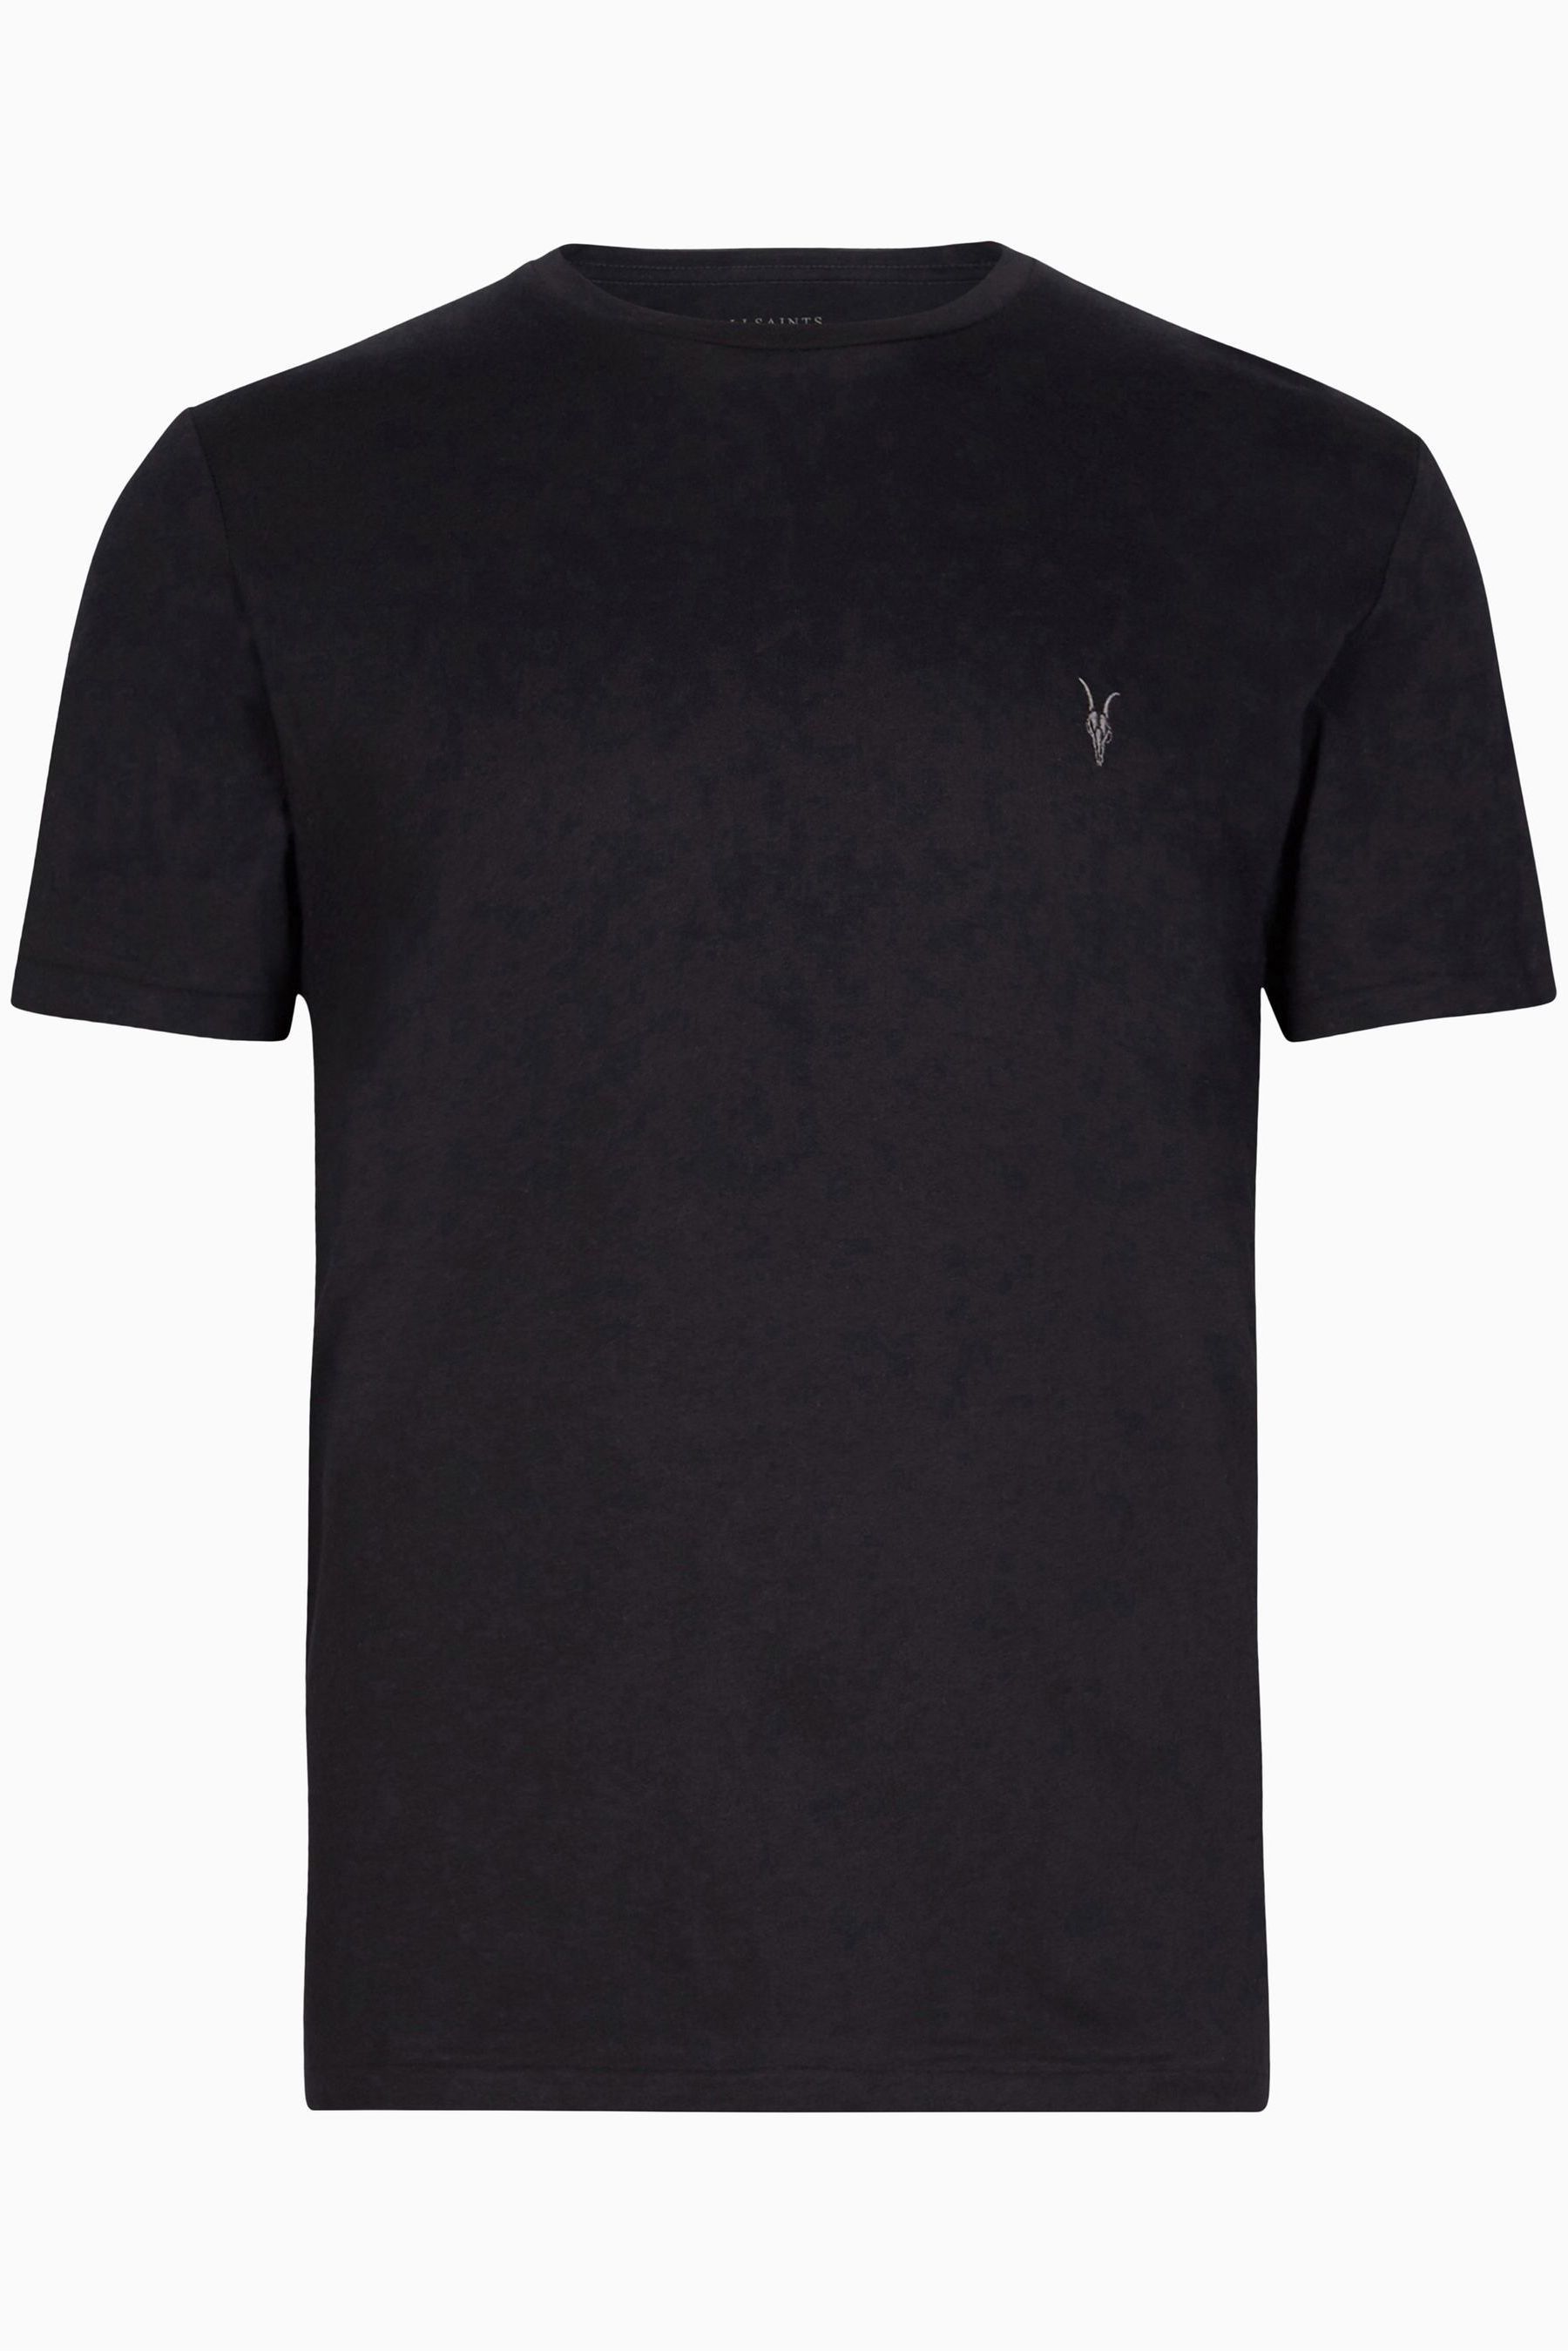 Buy AllSaints Navy Tonic Crew T-Shirt from the Next UK online shop